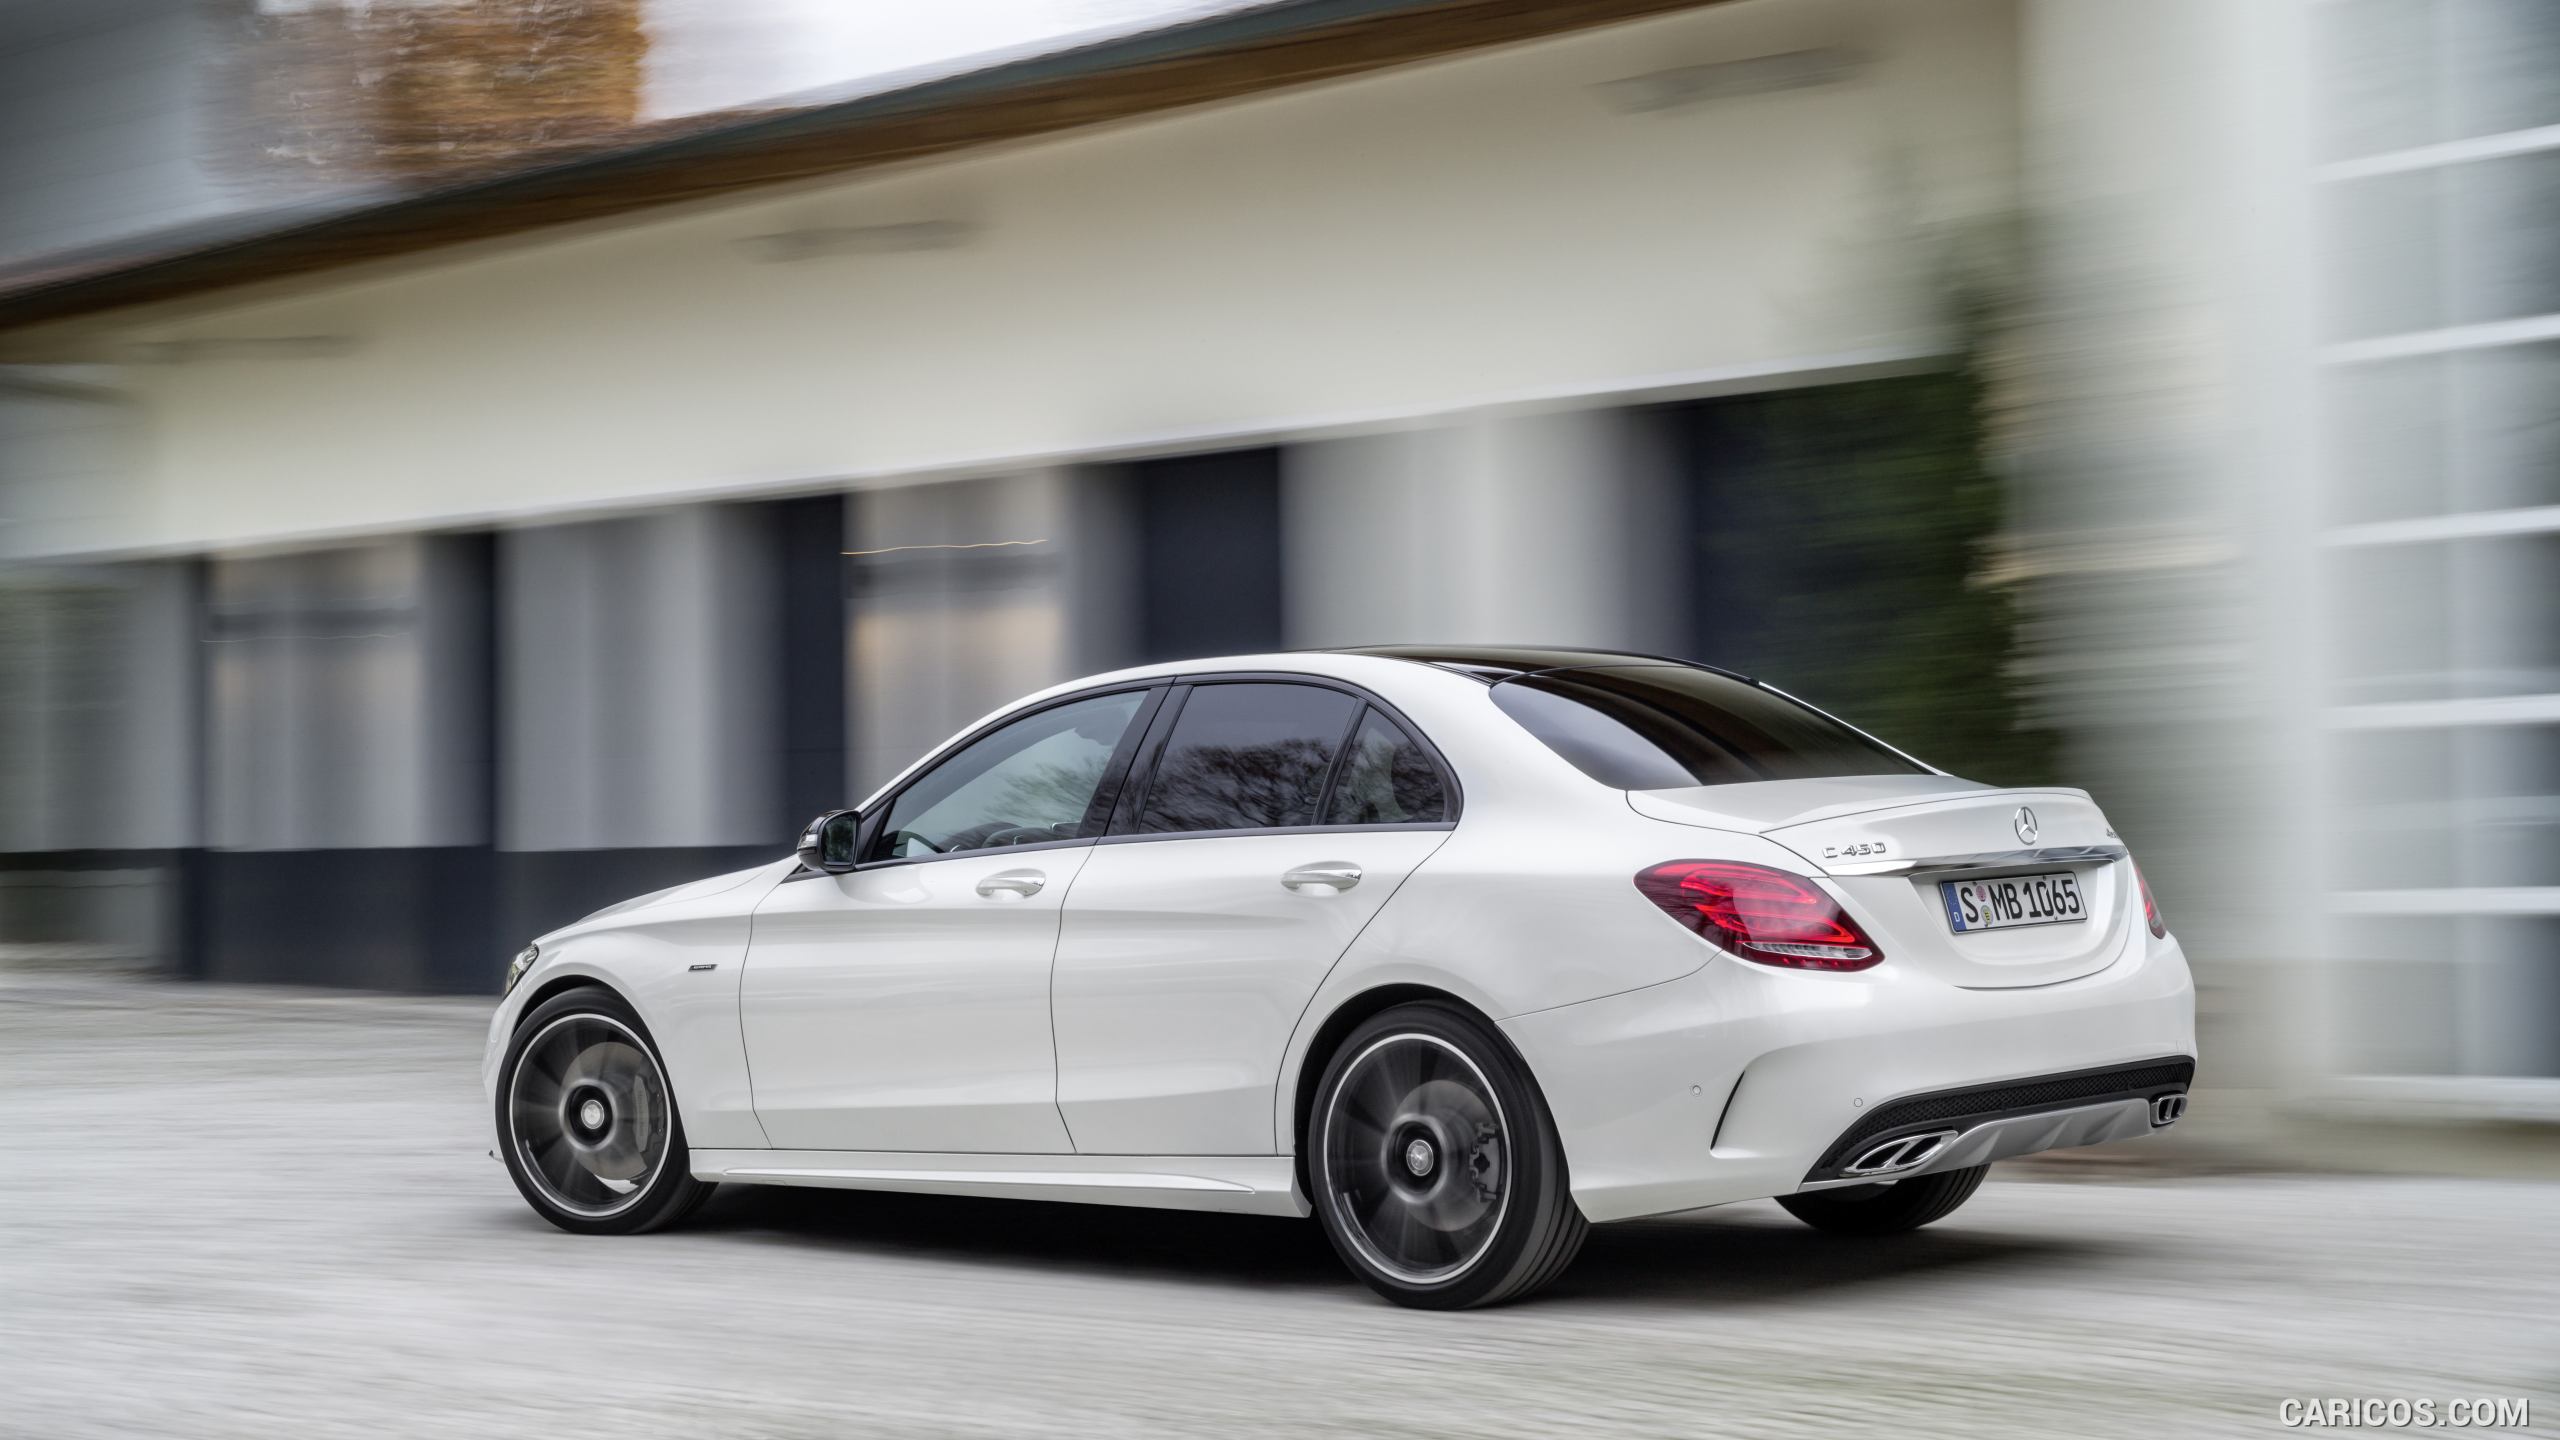 2016 Mercedes-Benz C450 AMG 4MATIC (Diamond White) - Side, #10 of 122